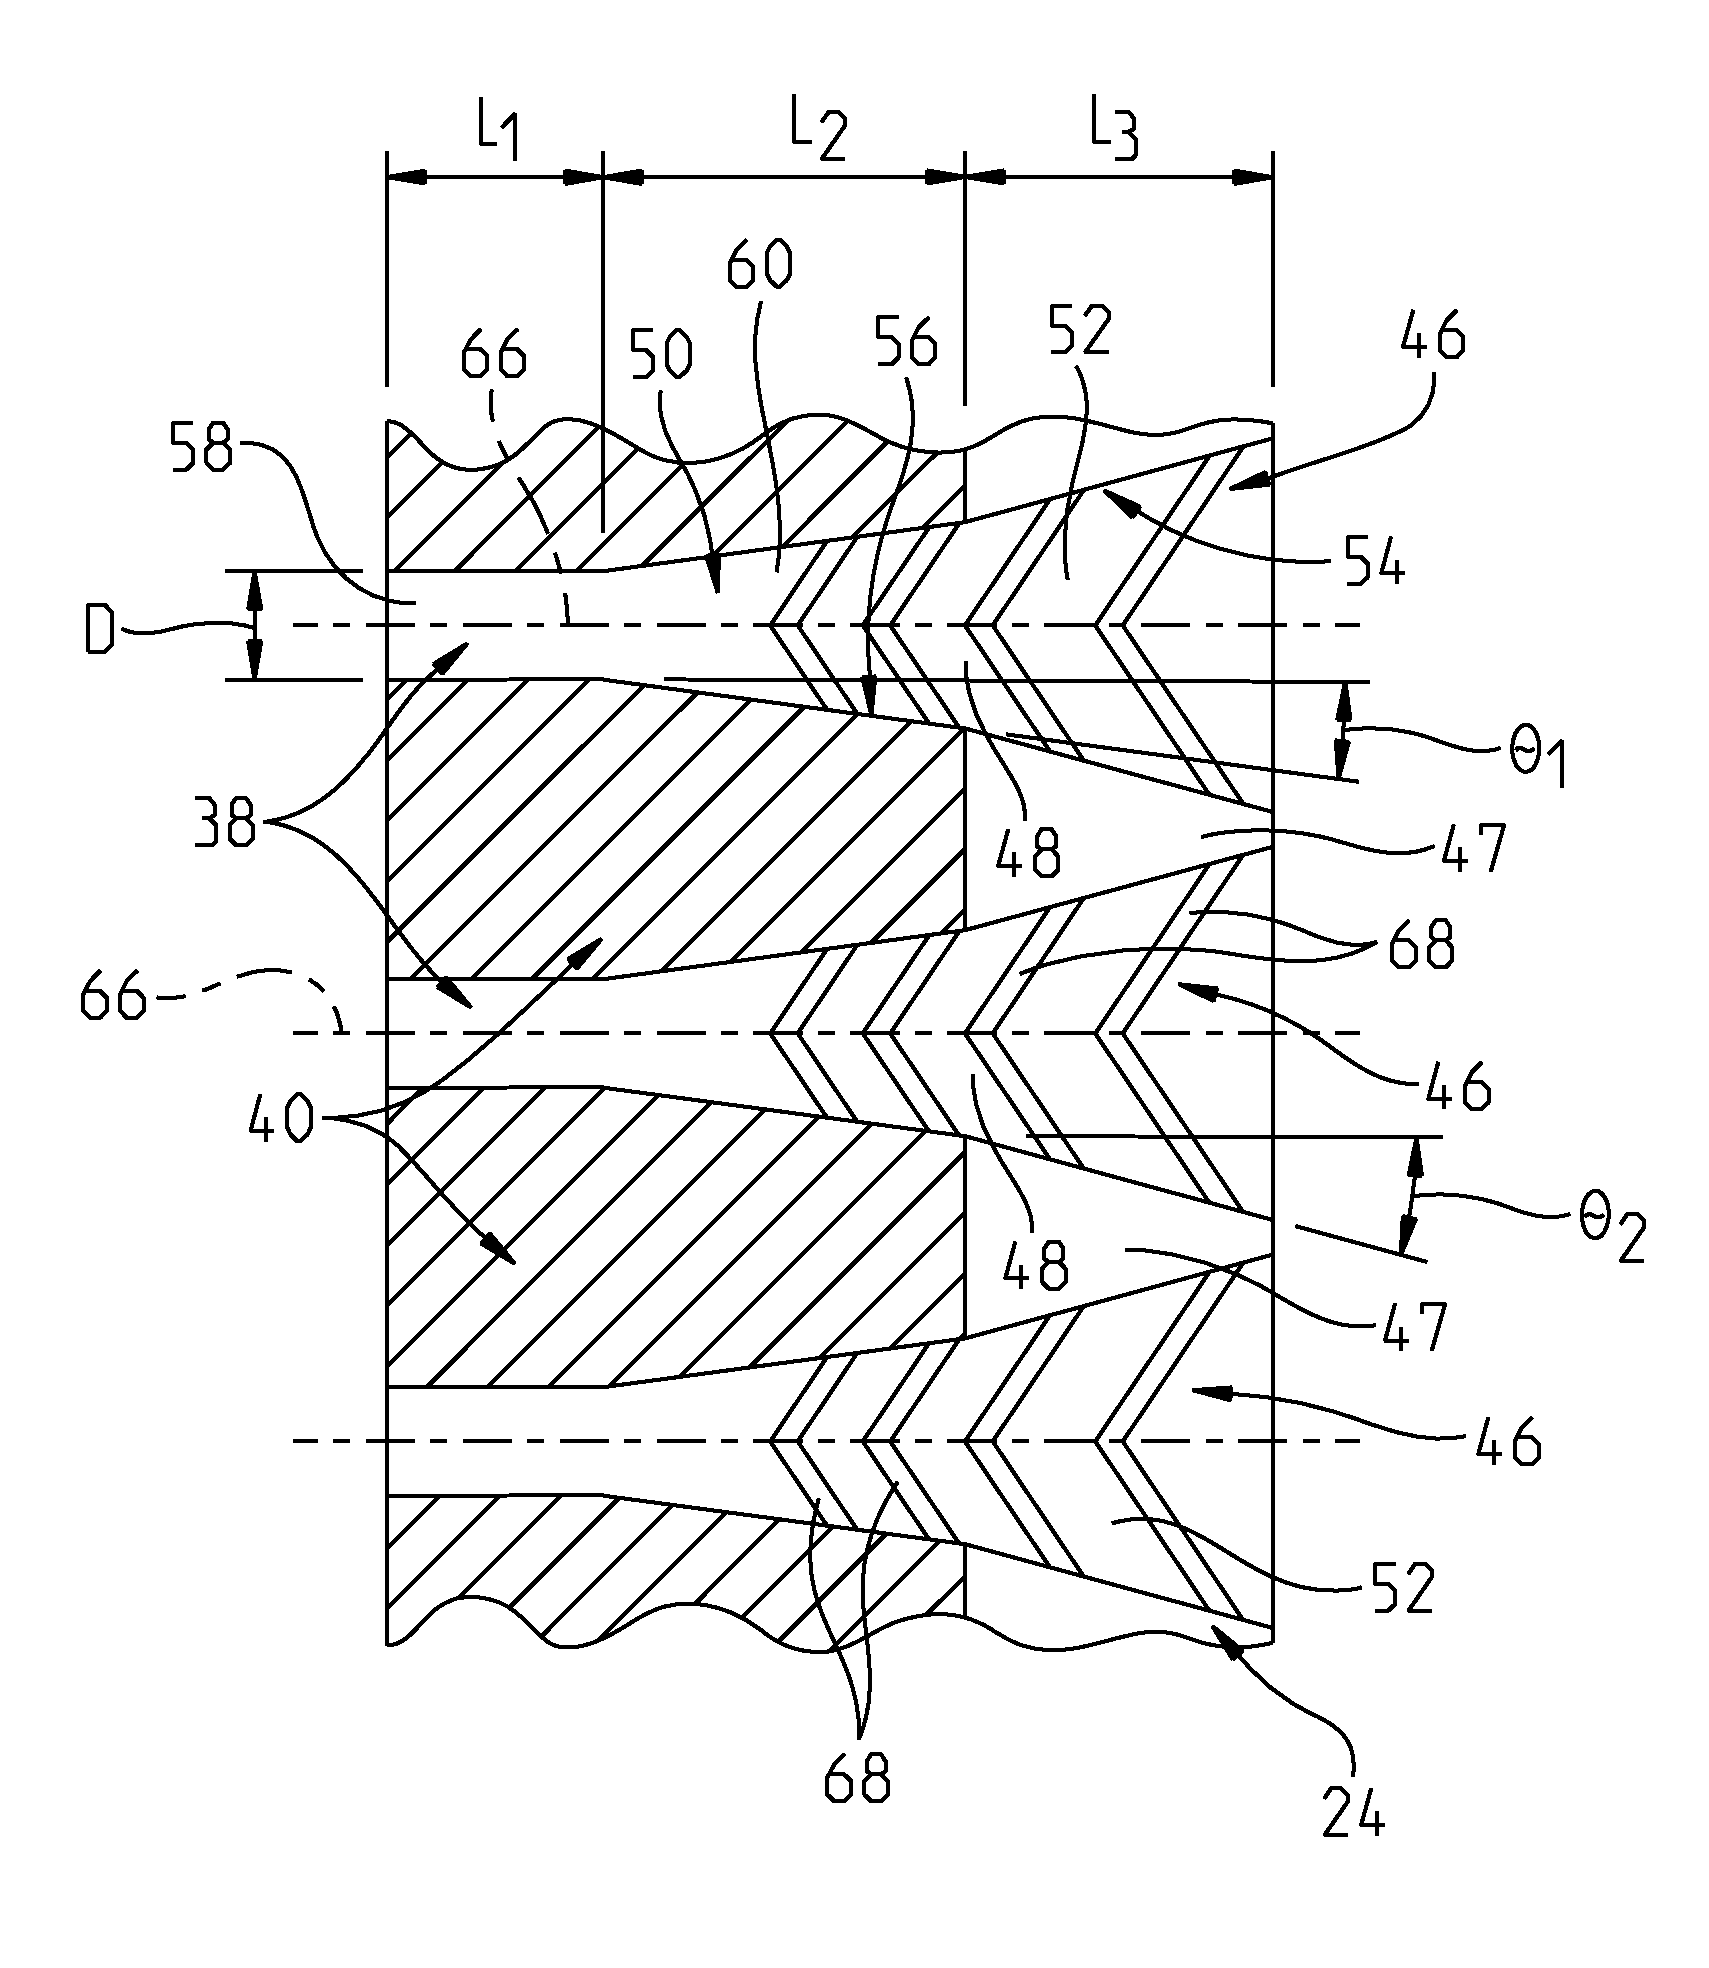 Trailing edge cooling slot configuration for a turbine airfoil